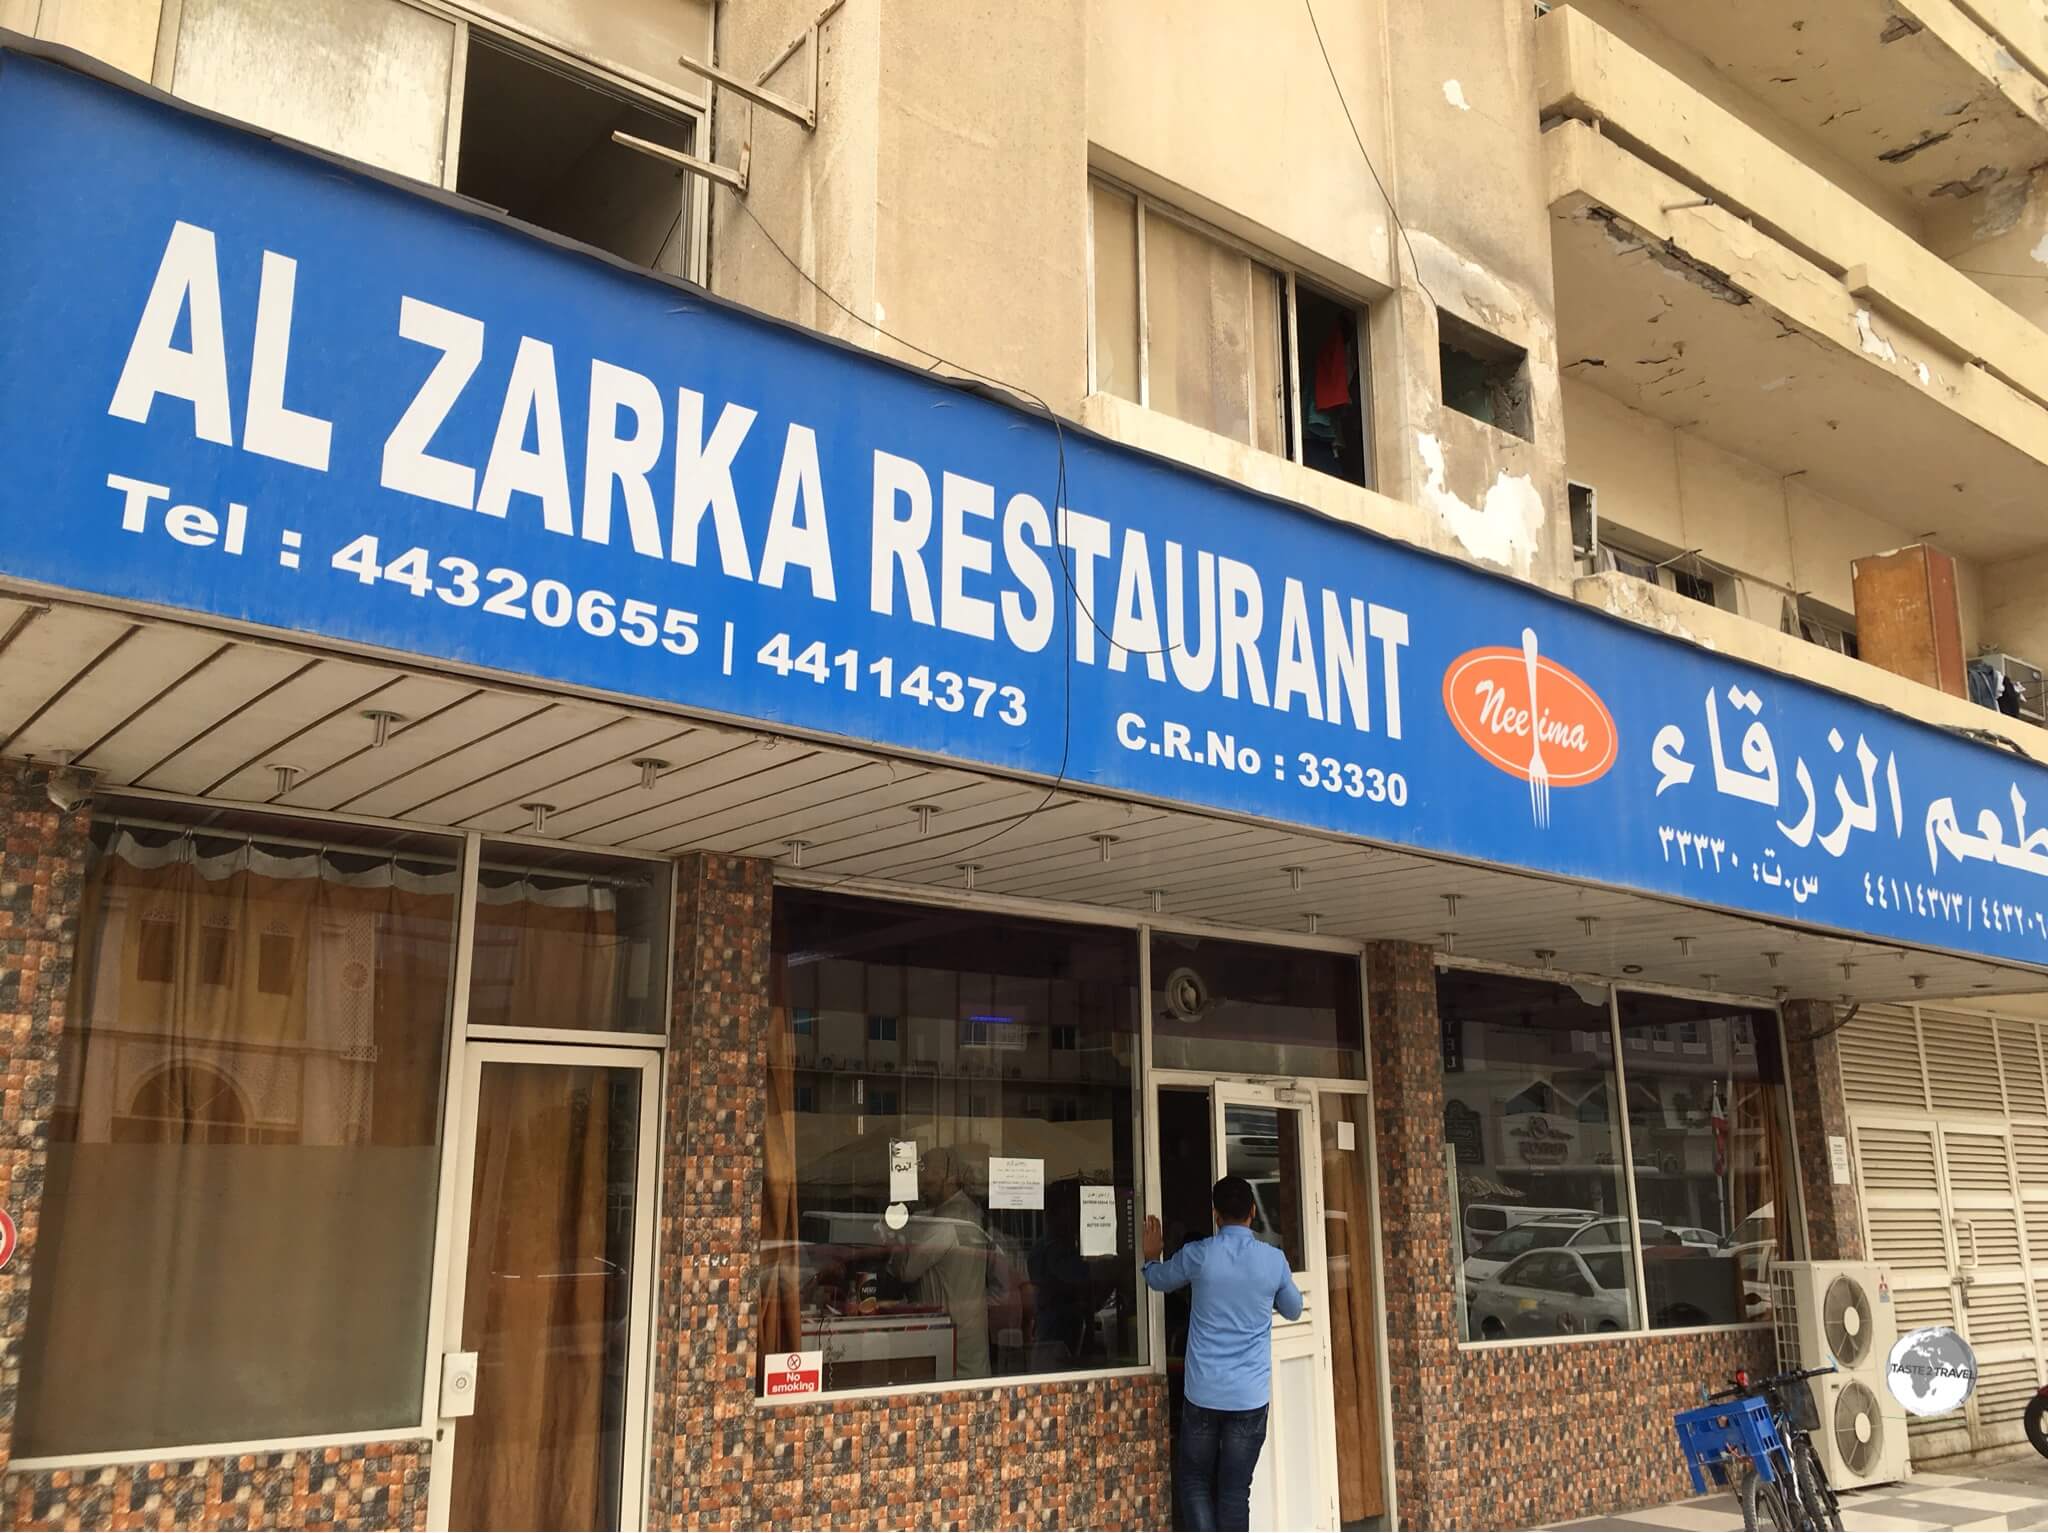 My regular breakfast restaurant in Doha, the Al Zarka restaurant is a typical Indian eatery, selling cheap, tasty dishes to the army of guest workers. 